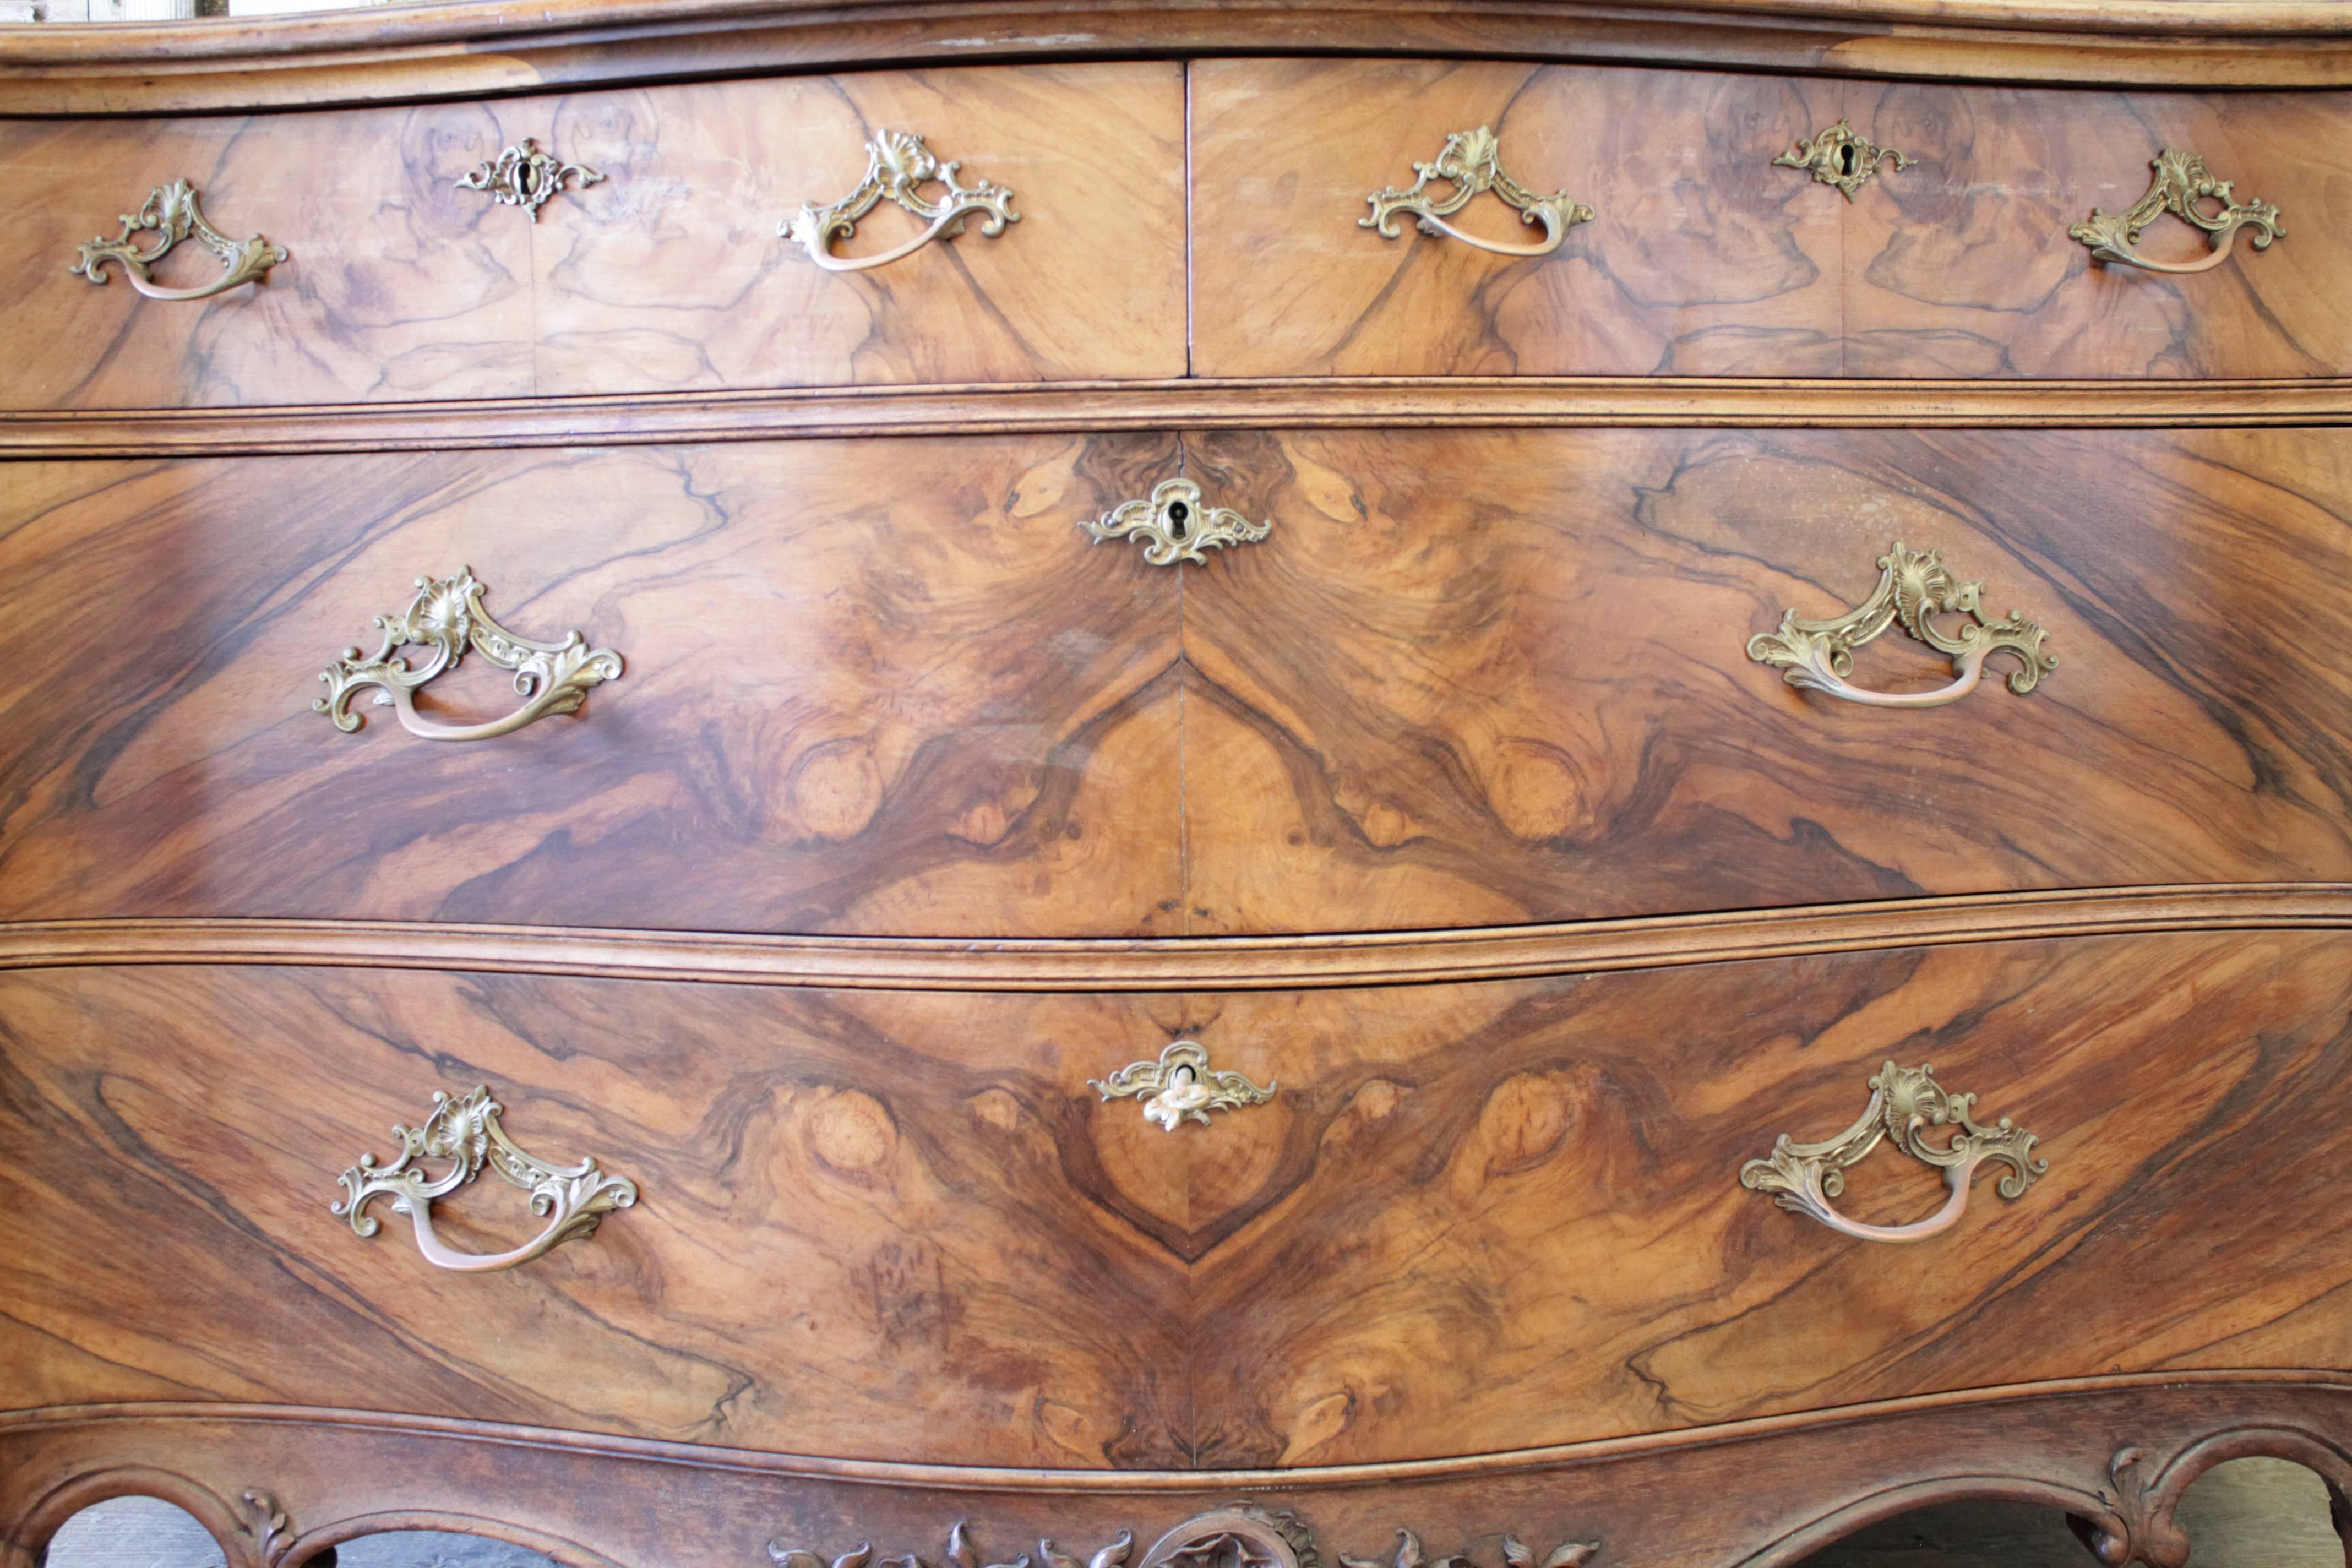 Exquisite chest of drawers commode hand-carved in the Louis XV style with large French cartouche and floral motifs. Rococo style commode made from solid mahogany, and English crotch bookmatch walnut veneers. Single key original to the piece is